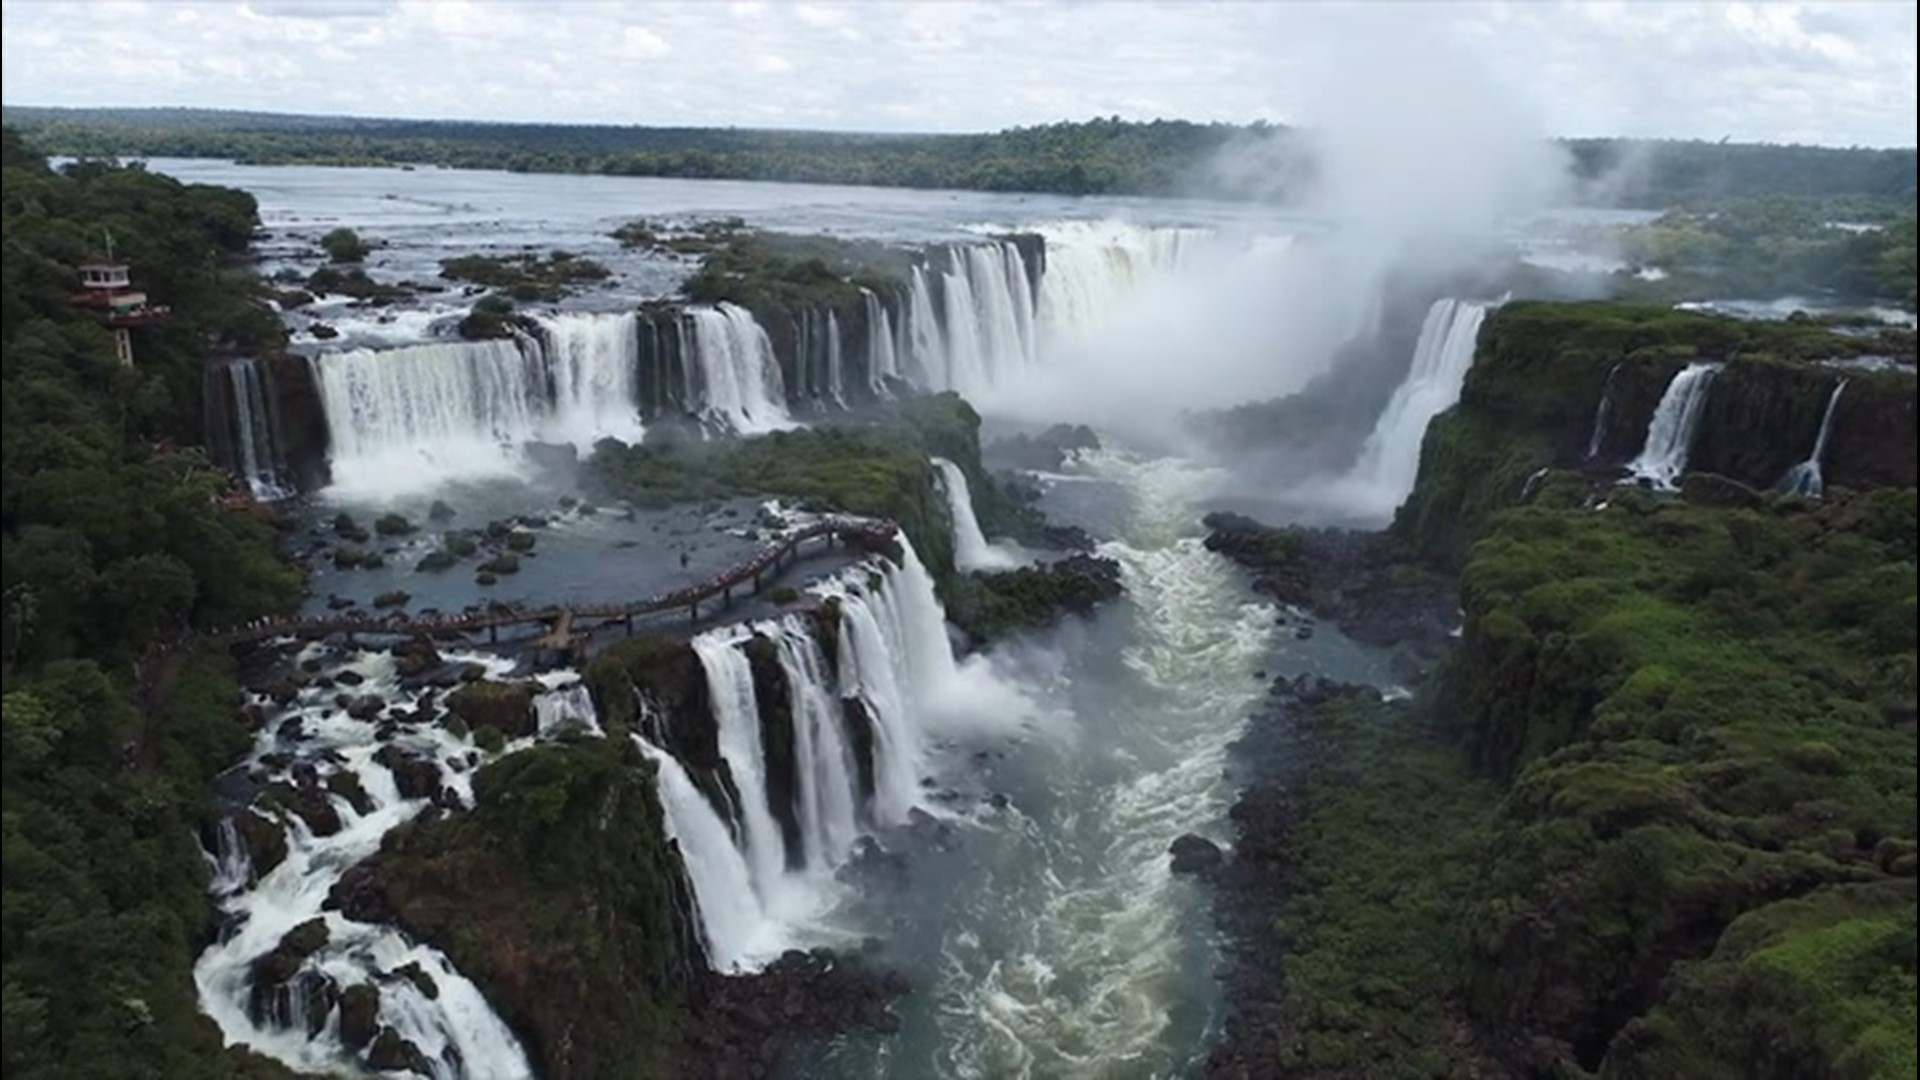 Iguazu Falls, located on the border of Argentina and Brazil, is one of the widest waterfalls in the world, at more than a mile and a half wide.